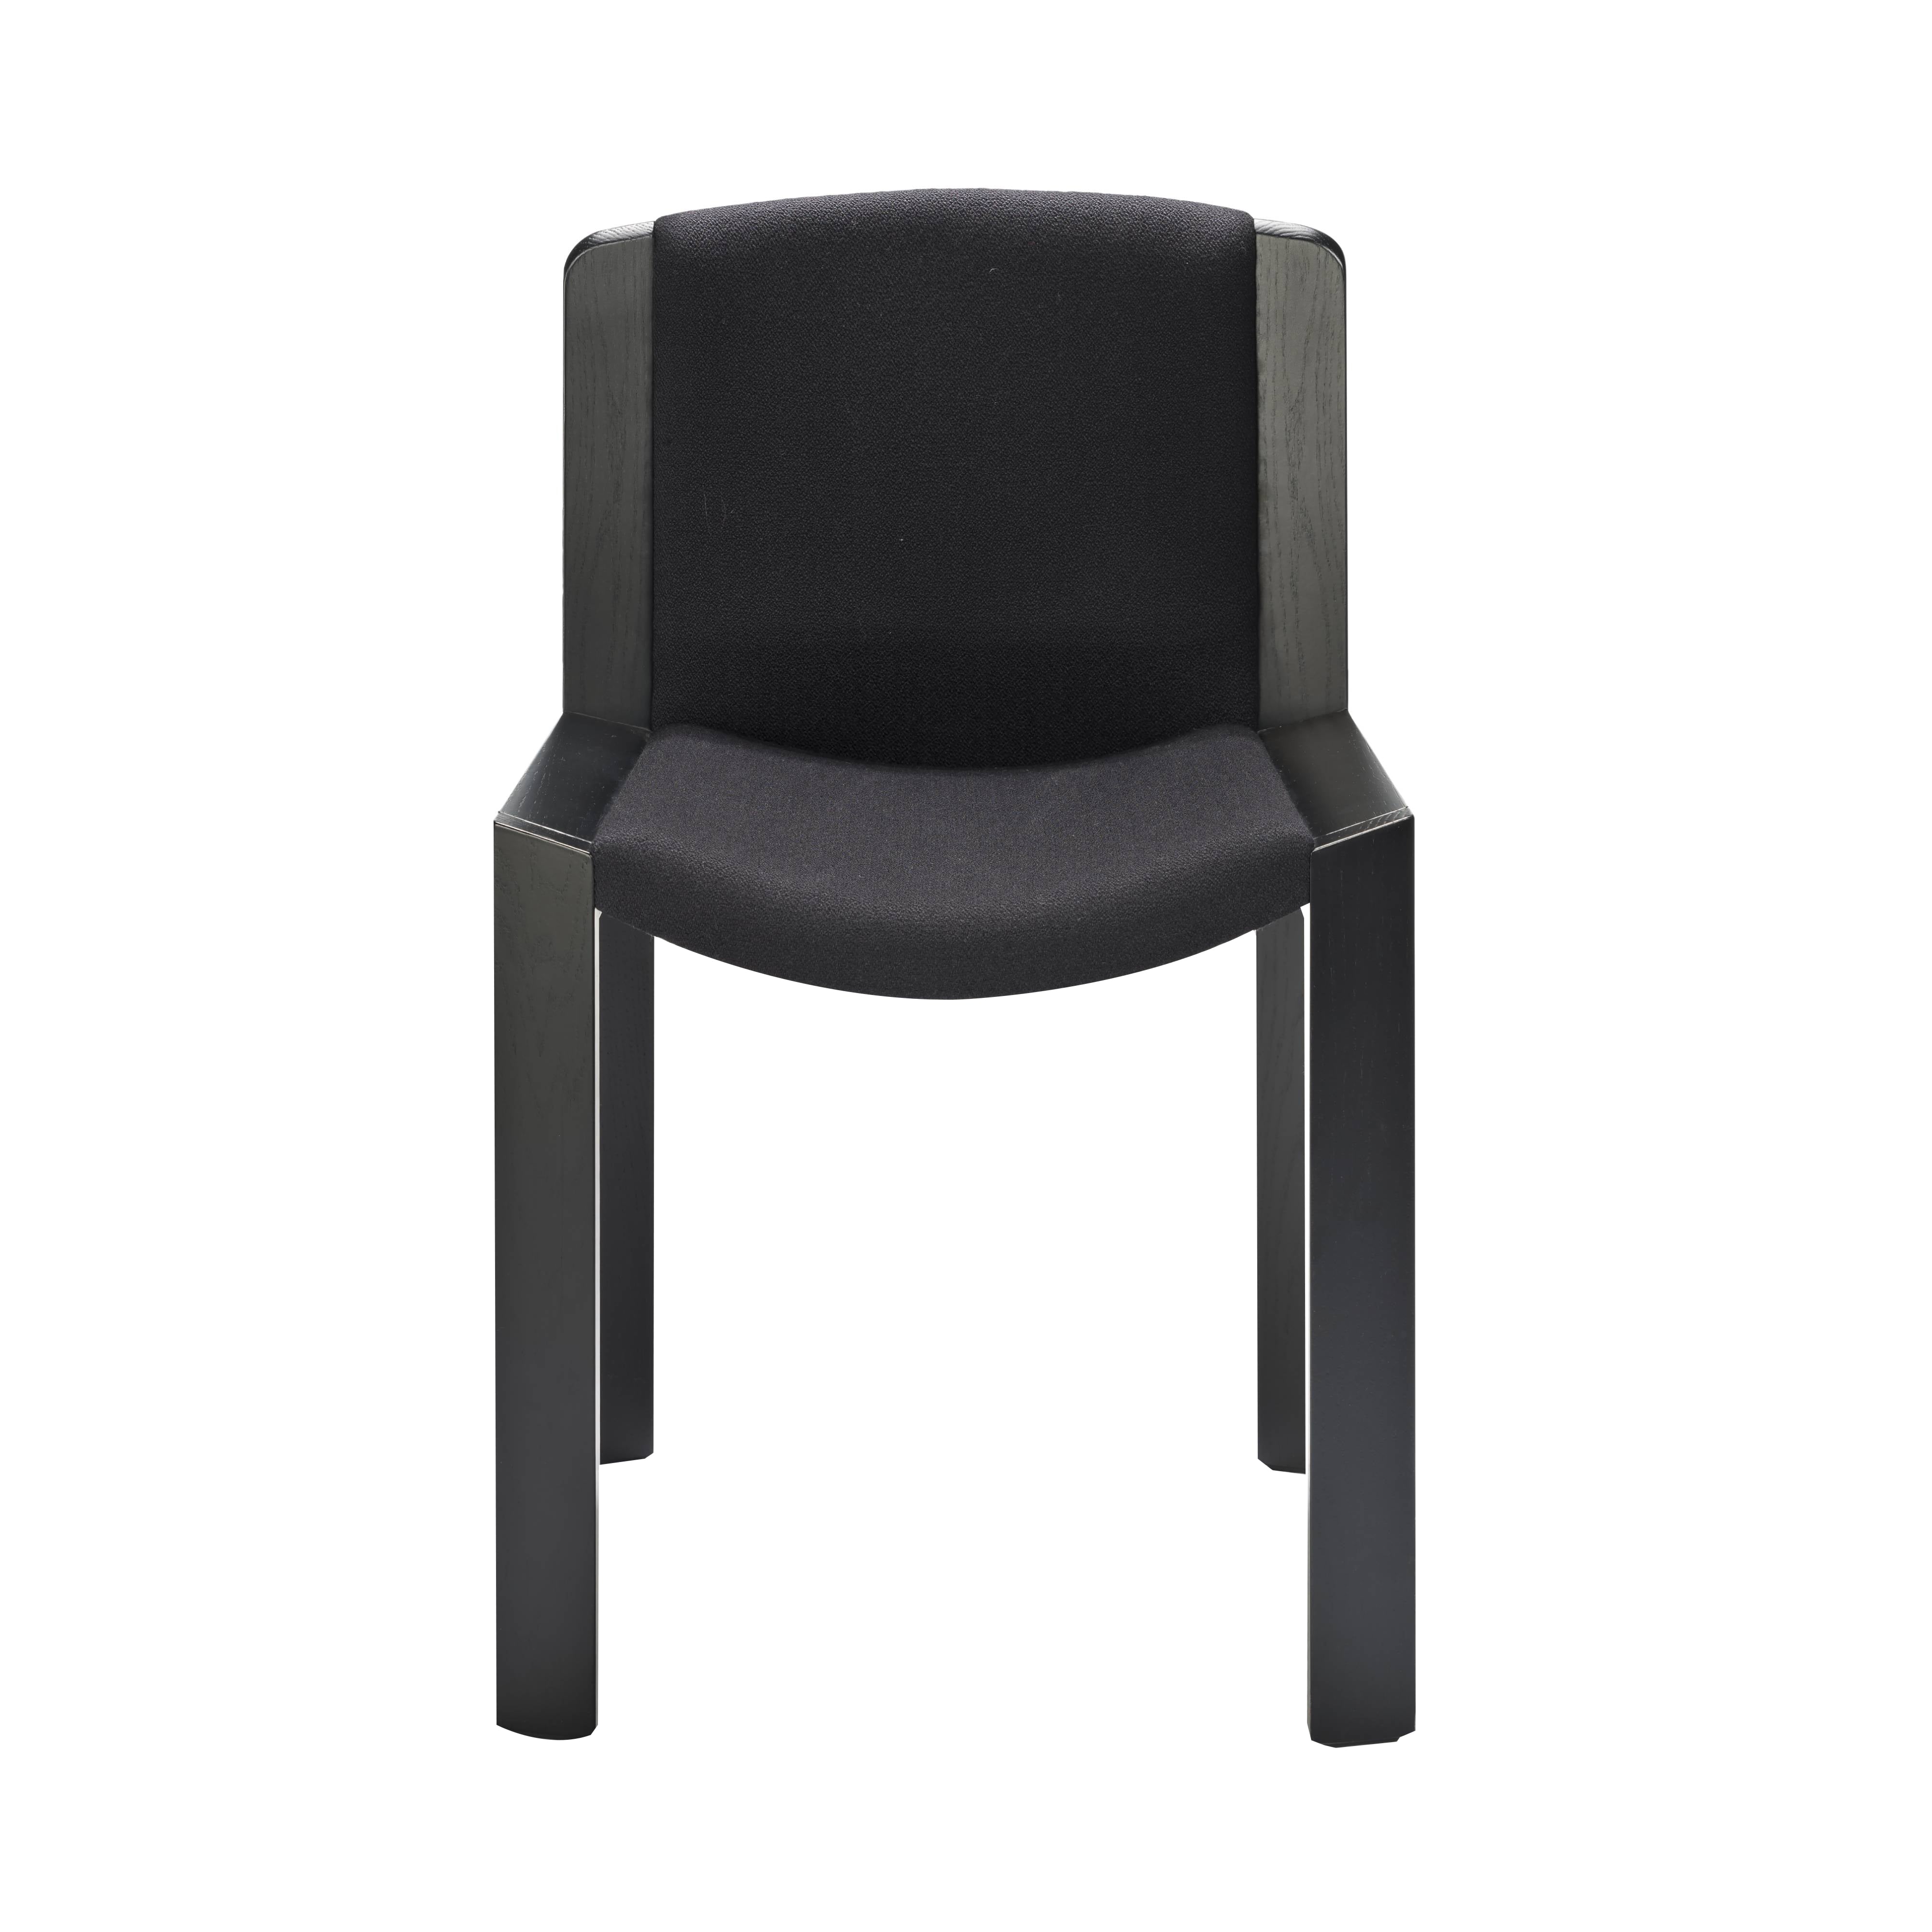 Chair 300: Black Lacquered